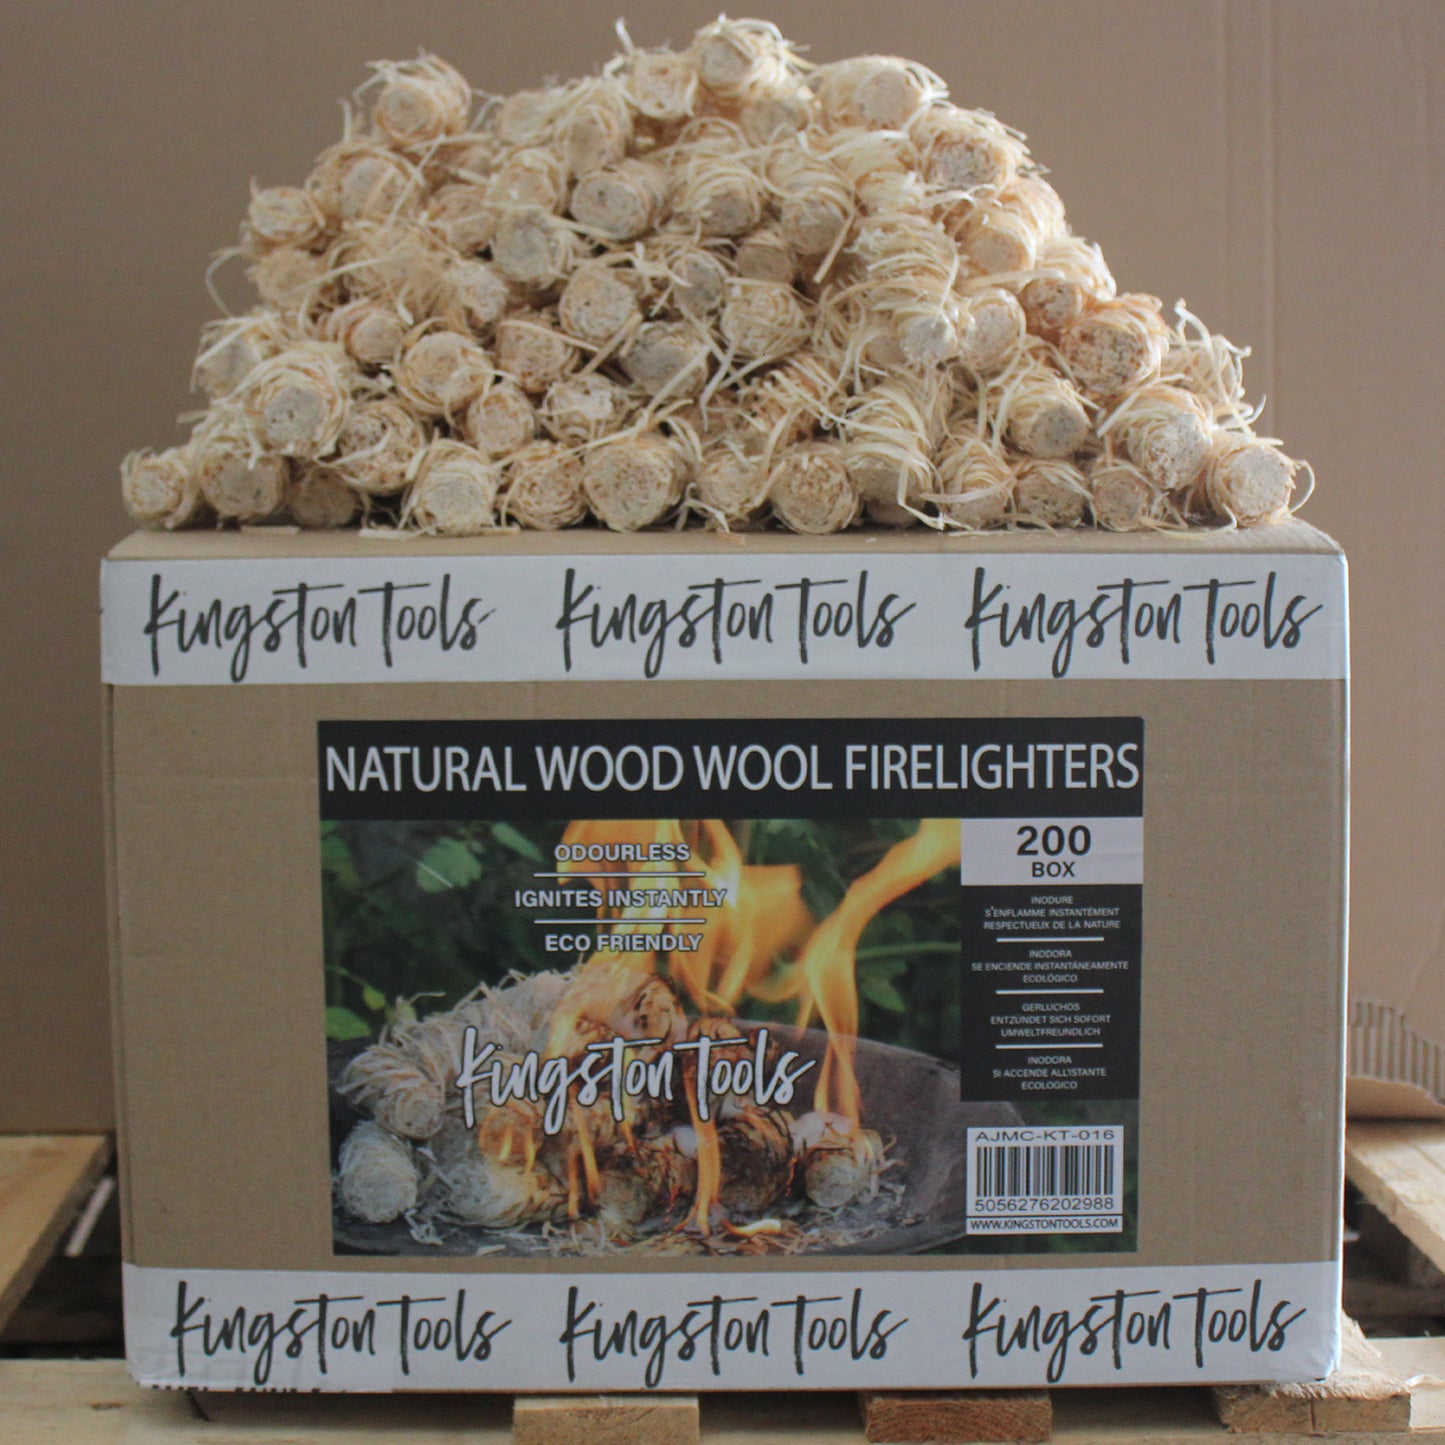 Natural Wood Wool Firelighters - Available in Bag of 20 and Box of 200